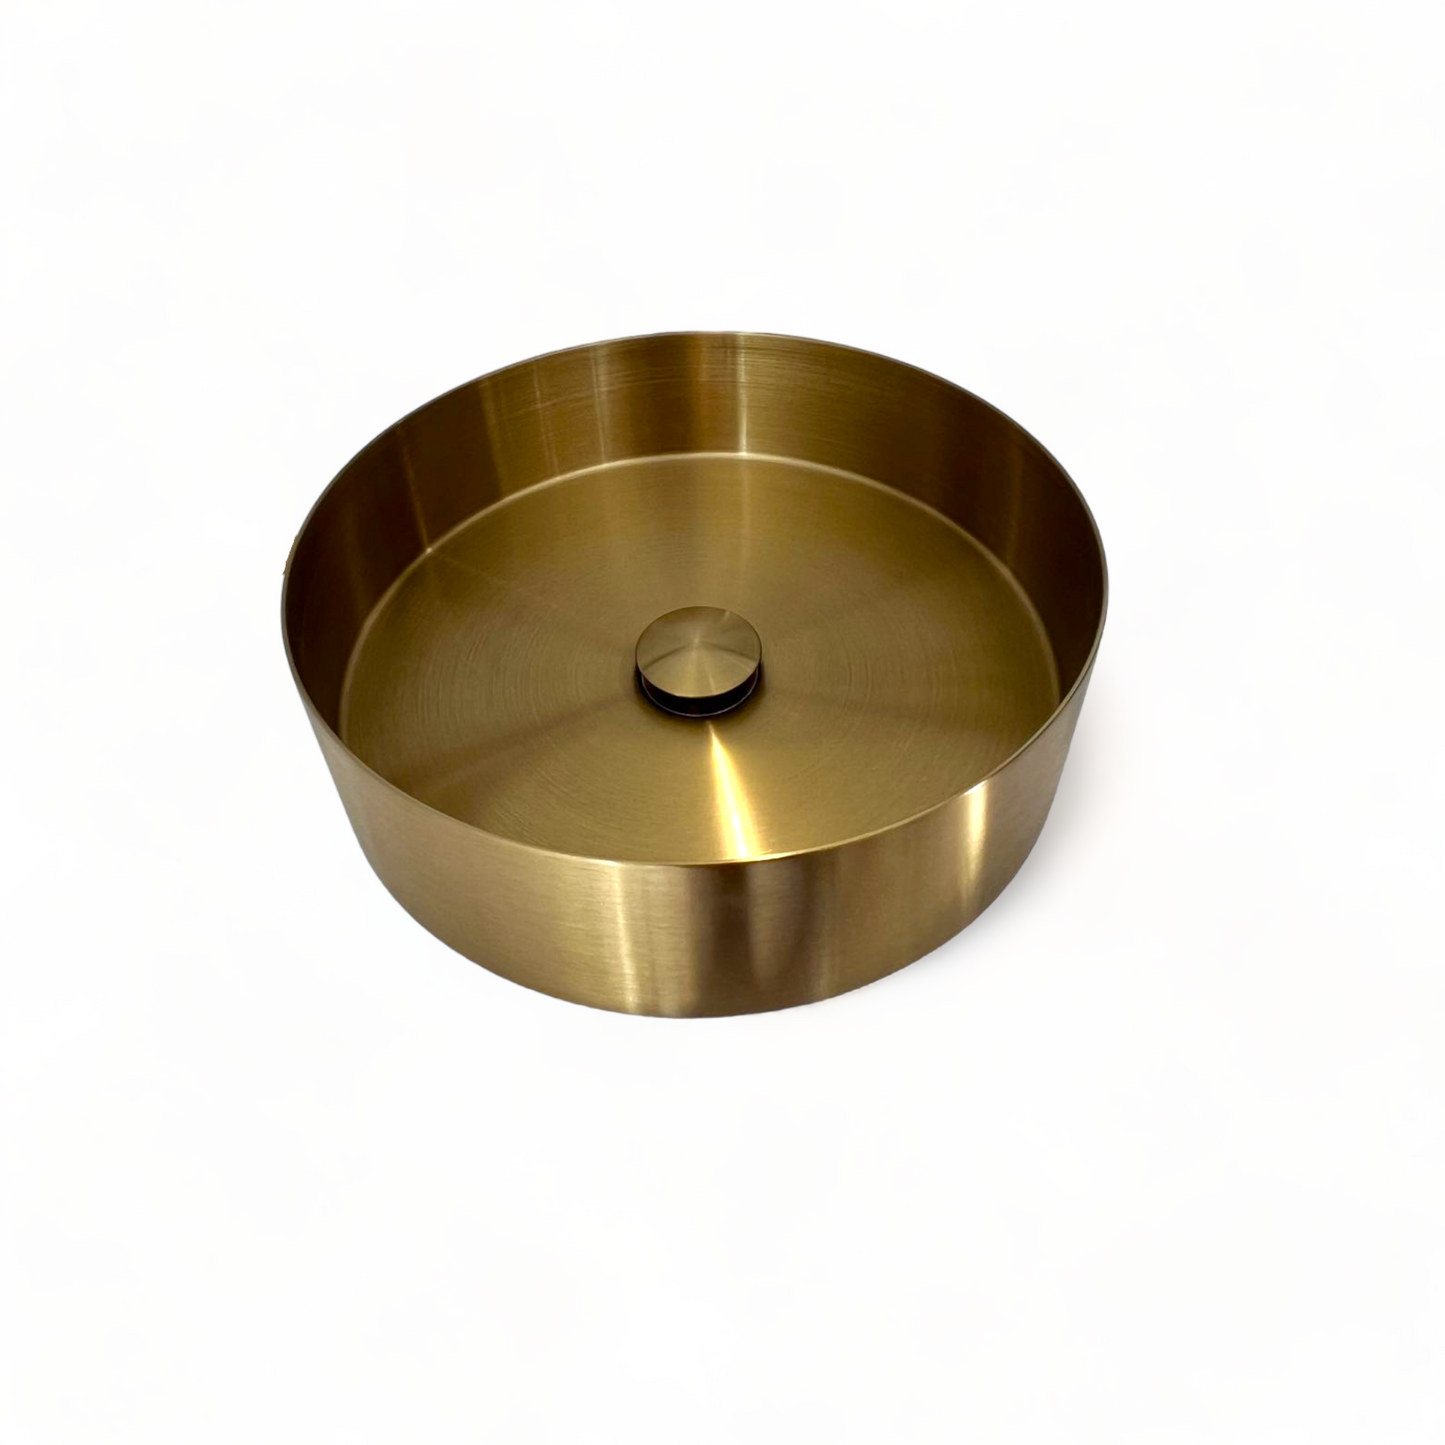 Stainless Steel Round Basin - Brushed Gold